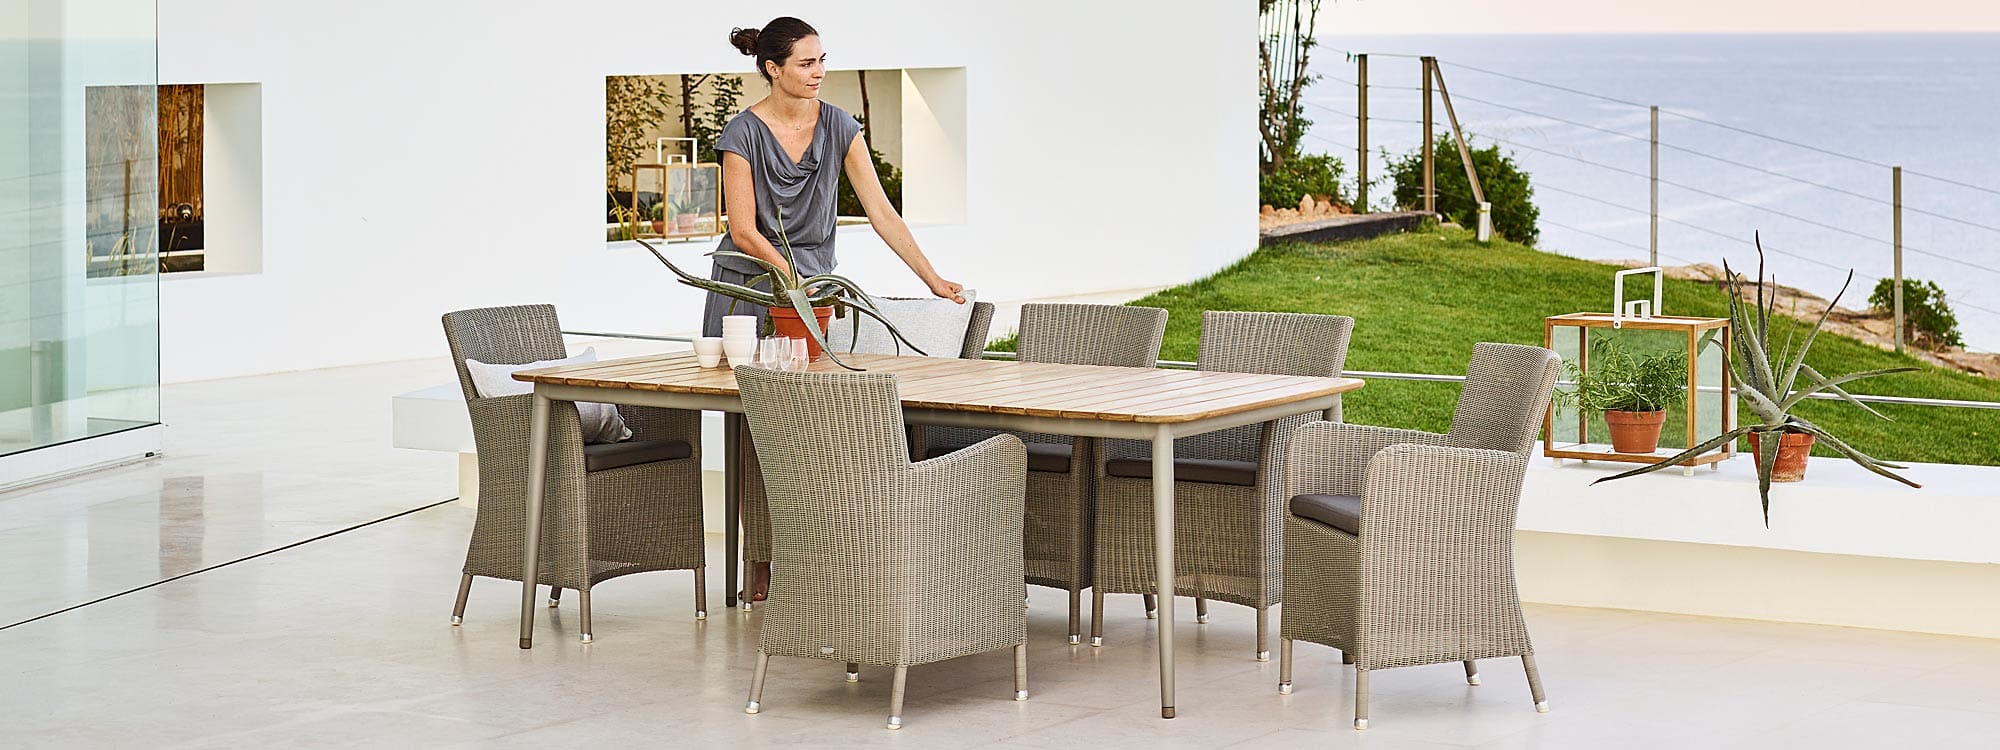 Image of Cane-line Hampsted taupe rattan garden chairs and Core dining table in taupe aluminum & teak on terrace